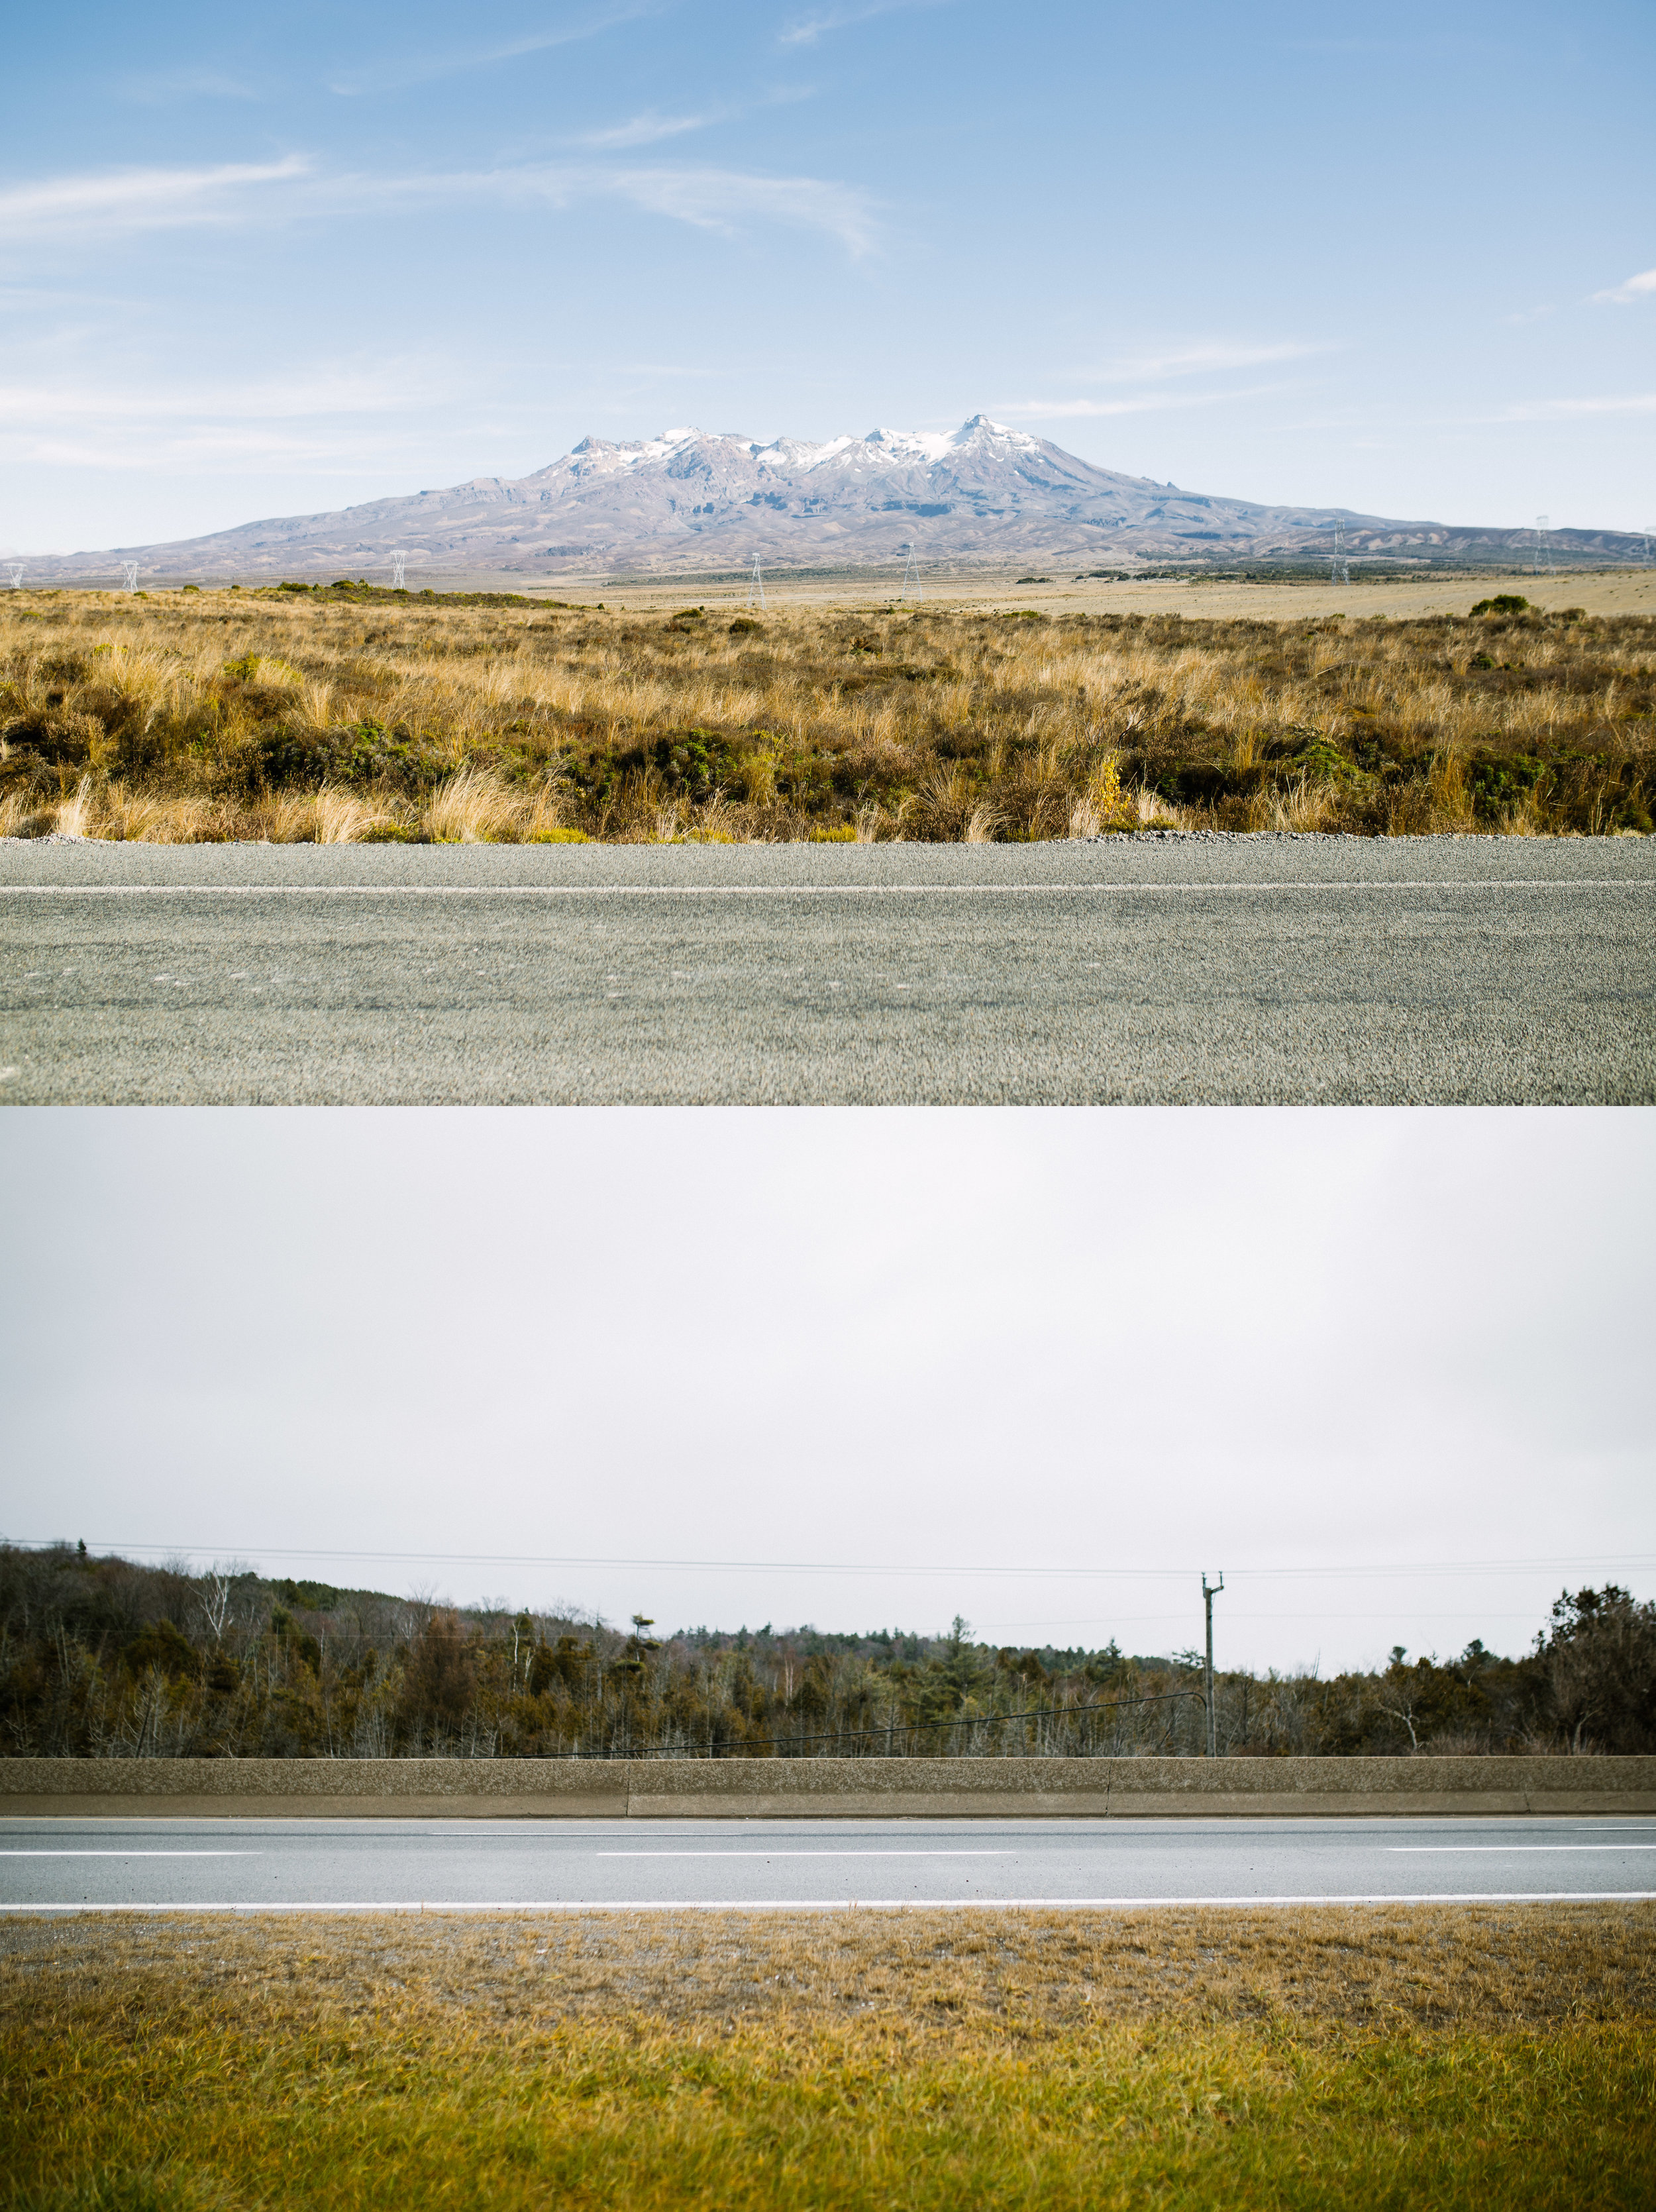  April 26 2017 / December 2 2016.  A contrasting image of the different landscapes my father is now accustomed to between New Zealand and Canada. One of the things he misses most is the landscapes of New Zealand; the mountains, hills, winding roads a